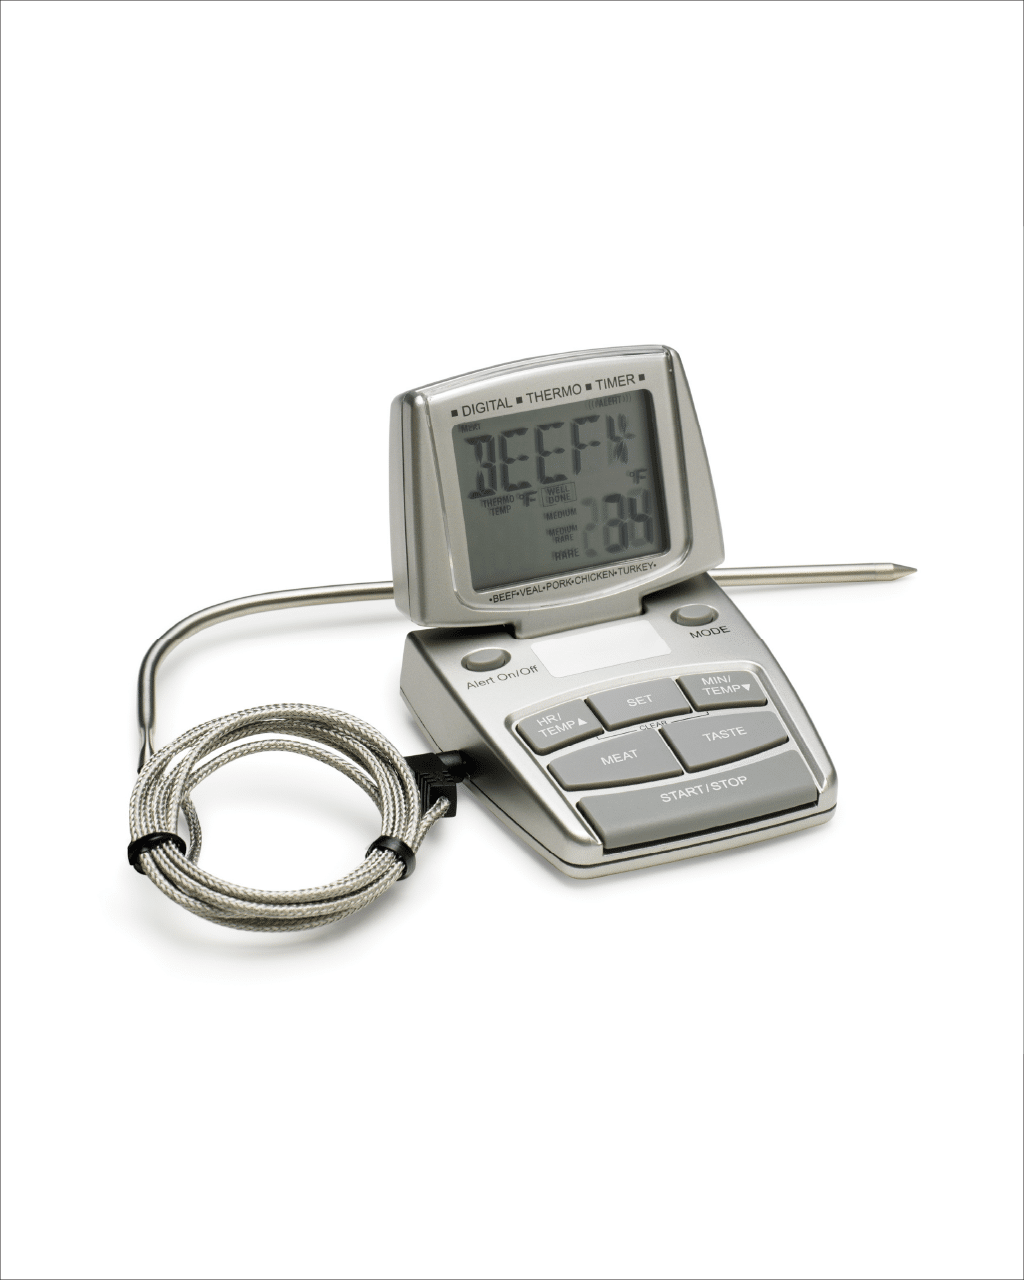 Masterbuilt 30 inch Digital Smoker, ThermoPro TP920 Meat Thermometer, First Smoke